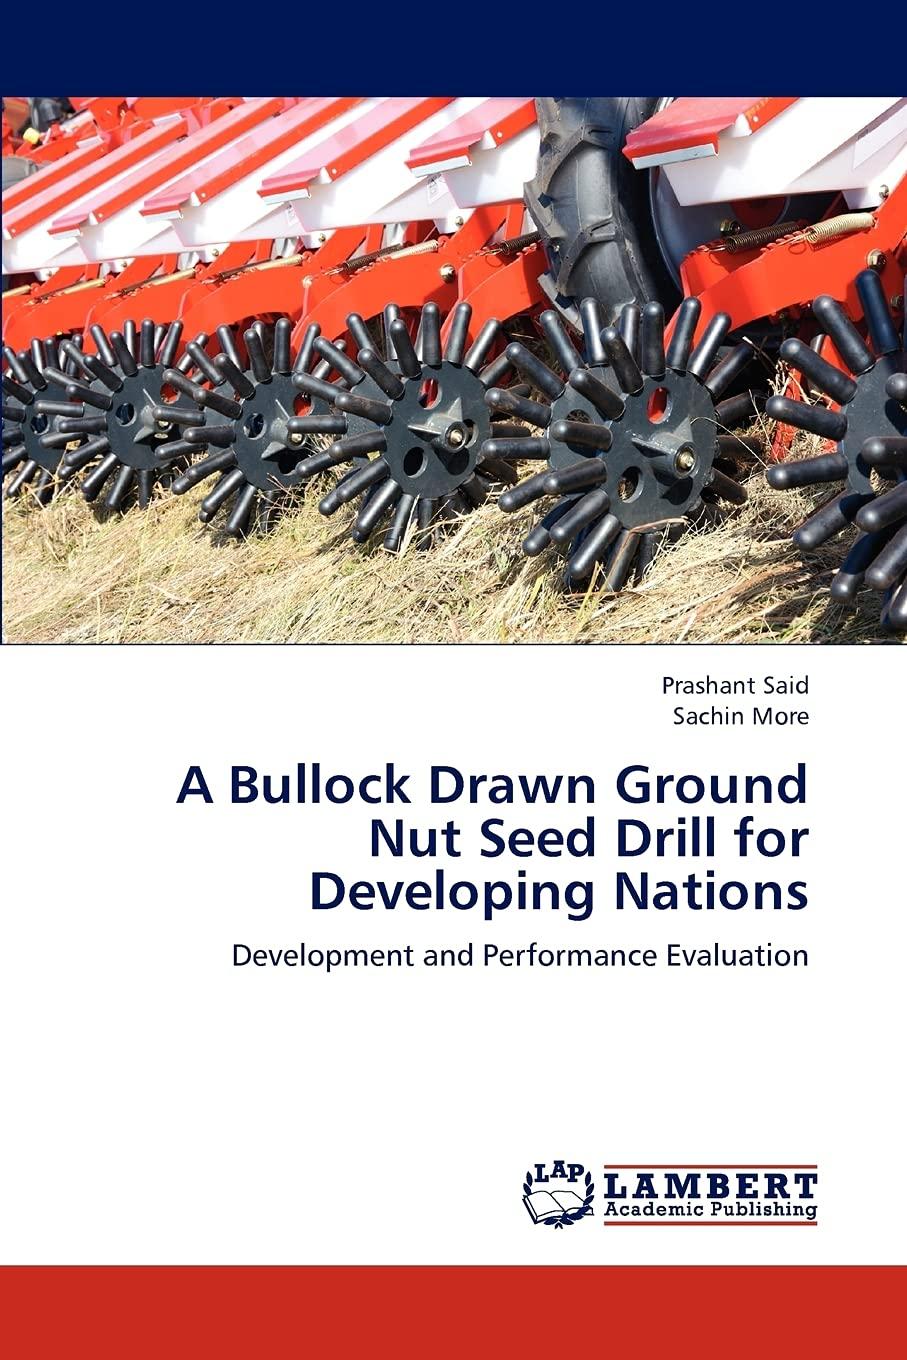 Bullock Drawn Seed Drill for Developing...